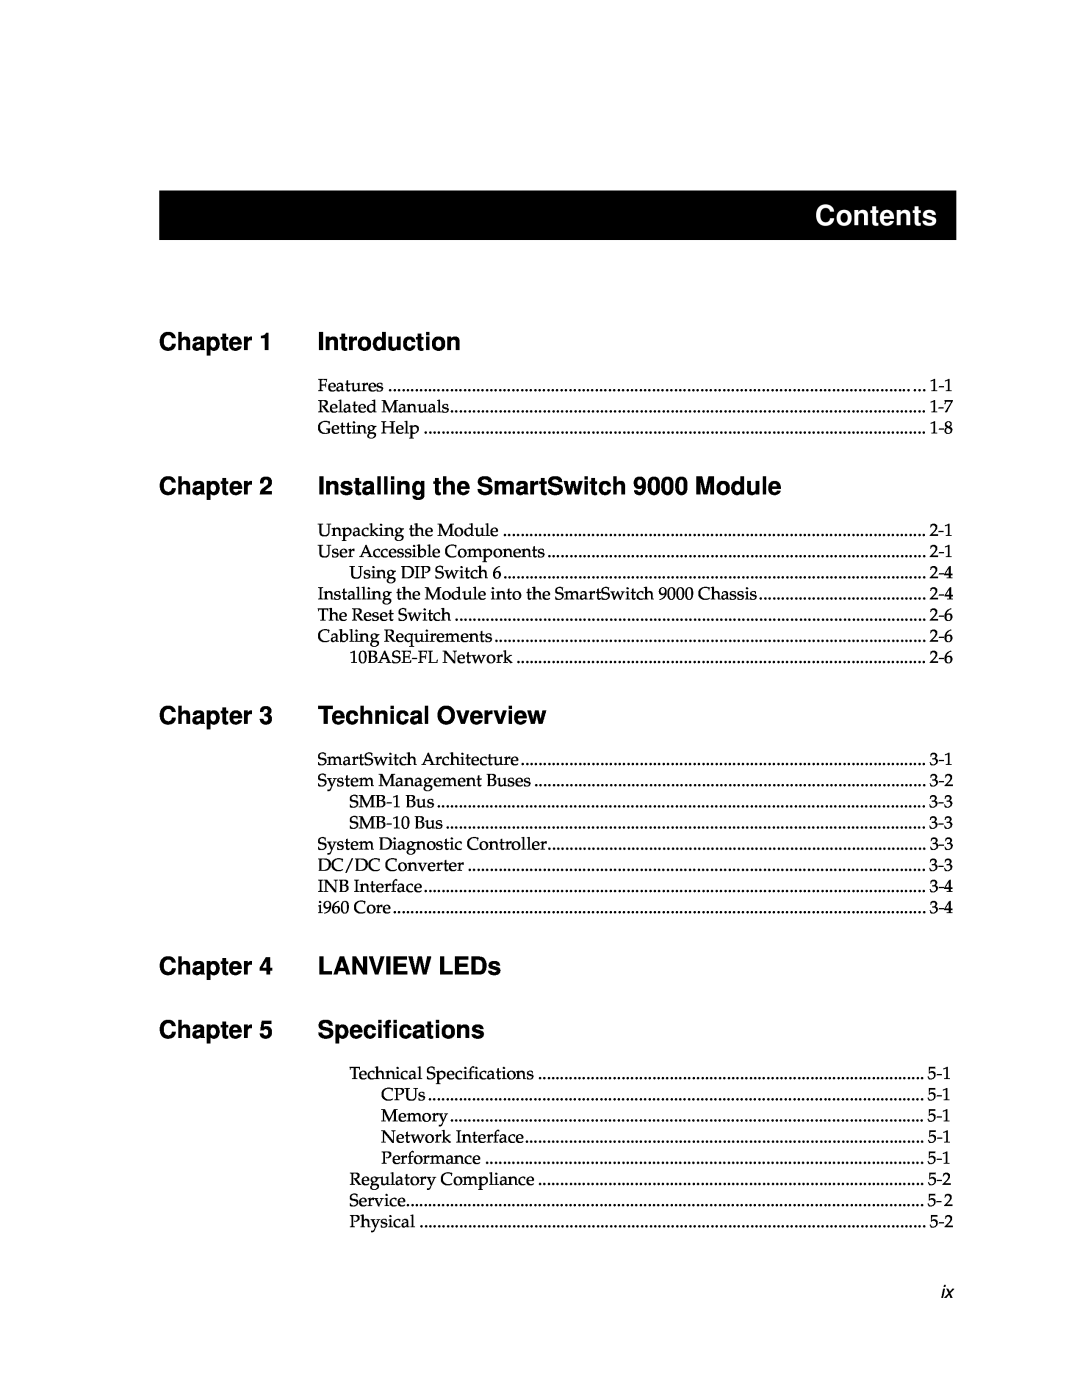 Cabletron Systems 9F125-0, 9F120-08 manual Contents, Chapter, Introduction, Technical Overview, LANVIEW LEDs, Specifications 